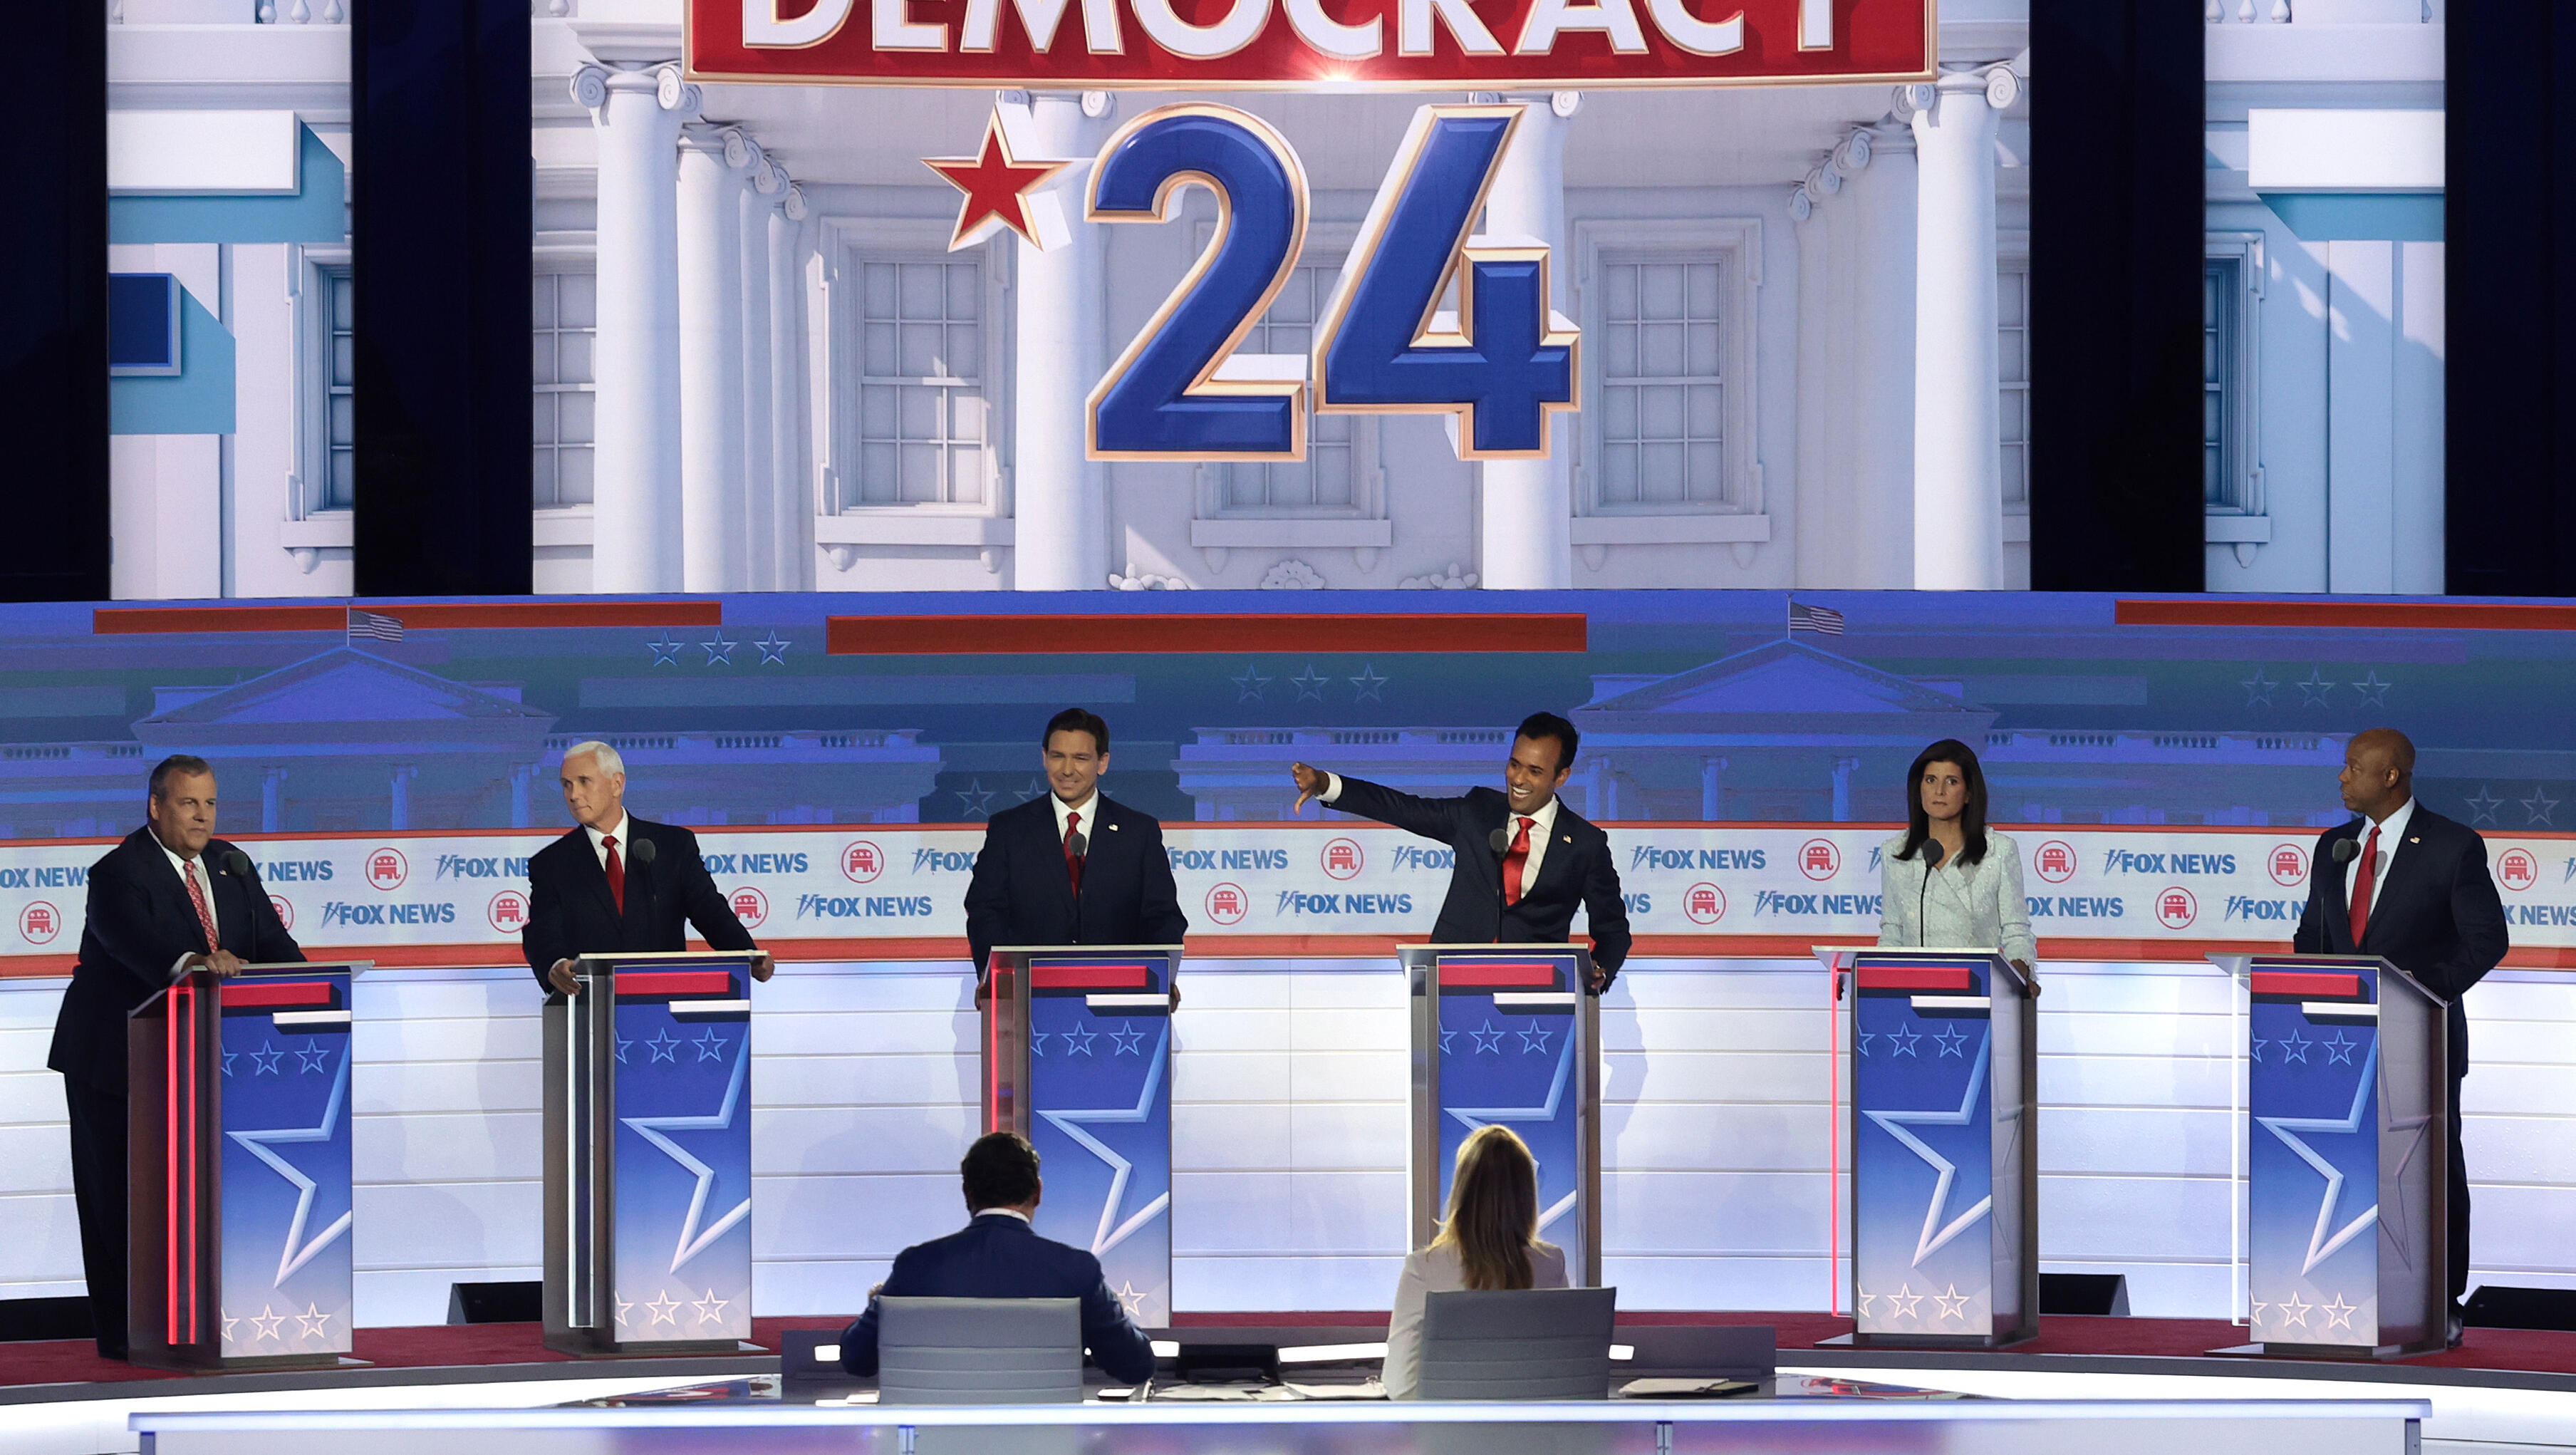 Second GOP Presidential Debate: A Glimpse at the Candidates